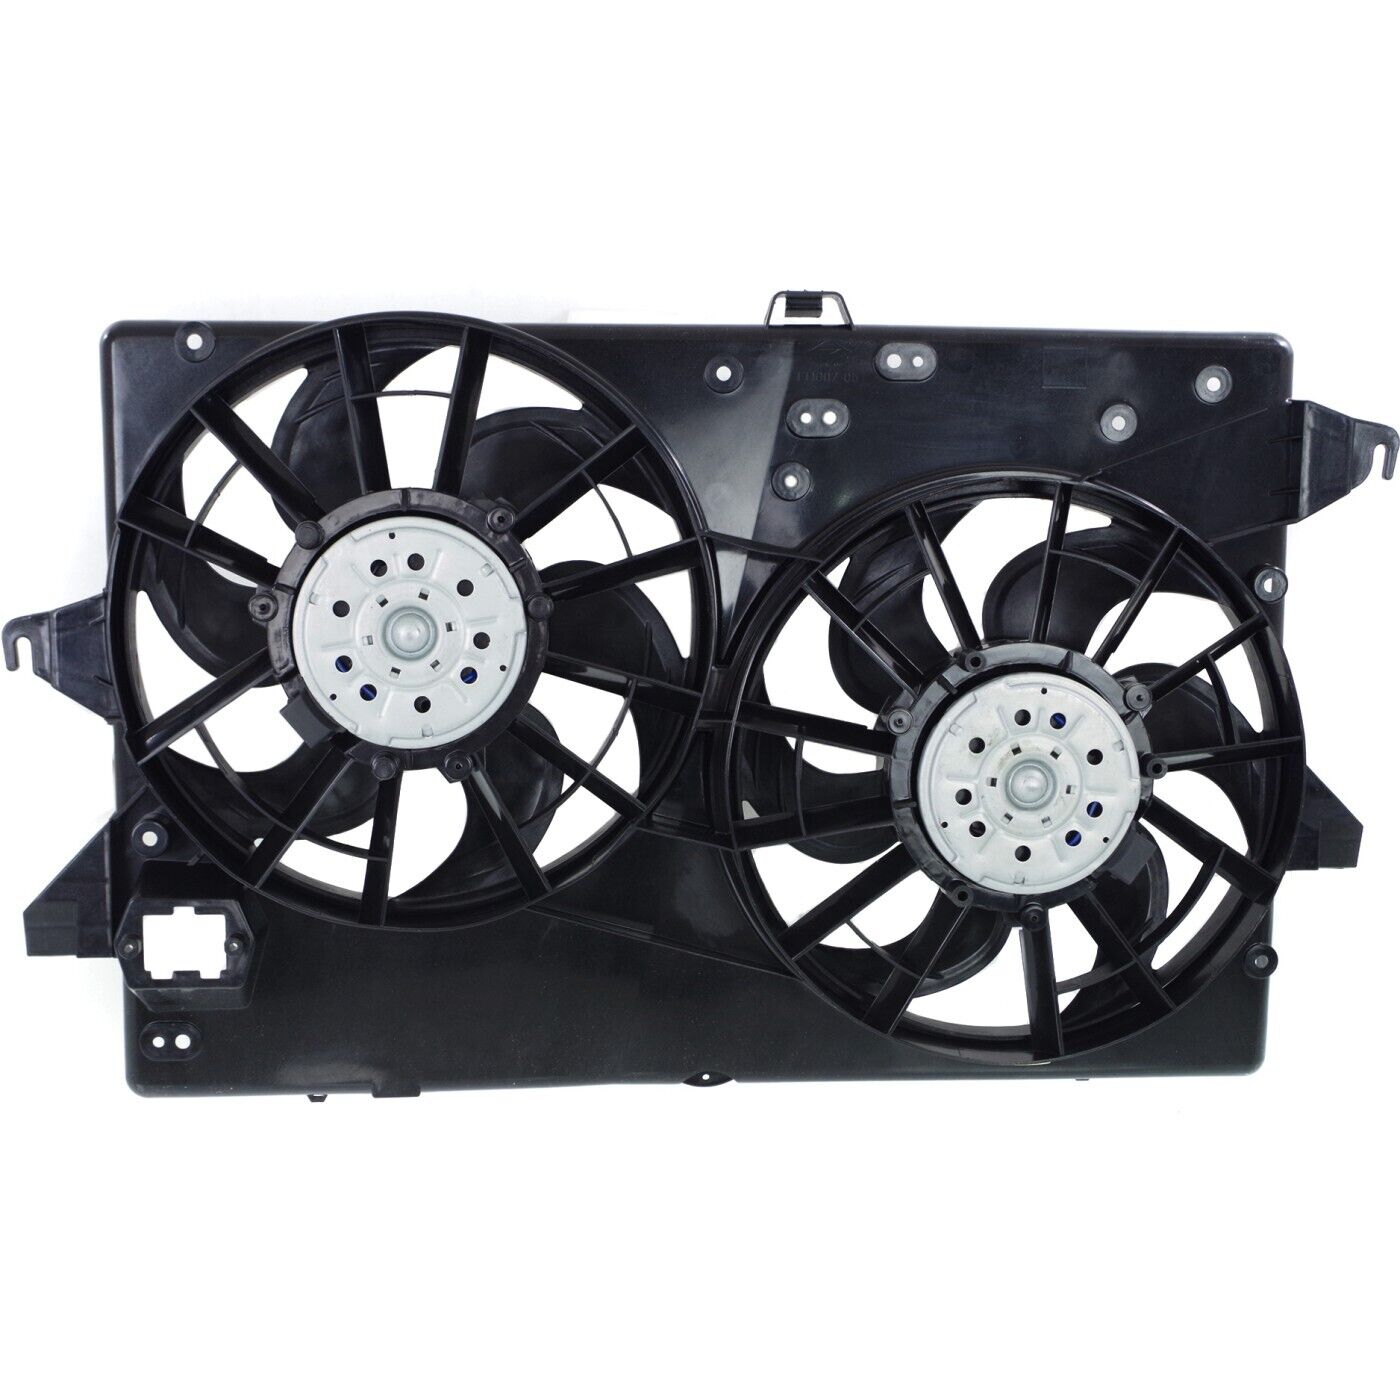 Dual Radiator A/C Air Conditioning Cooling Fan for Contour Cougar Mystique